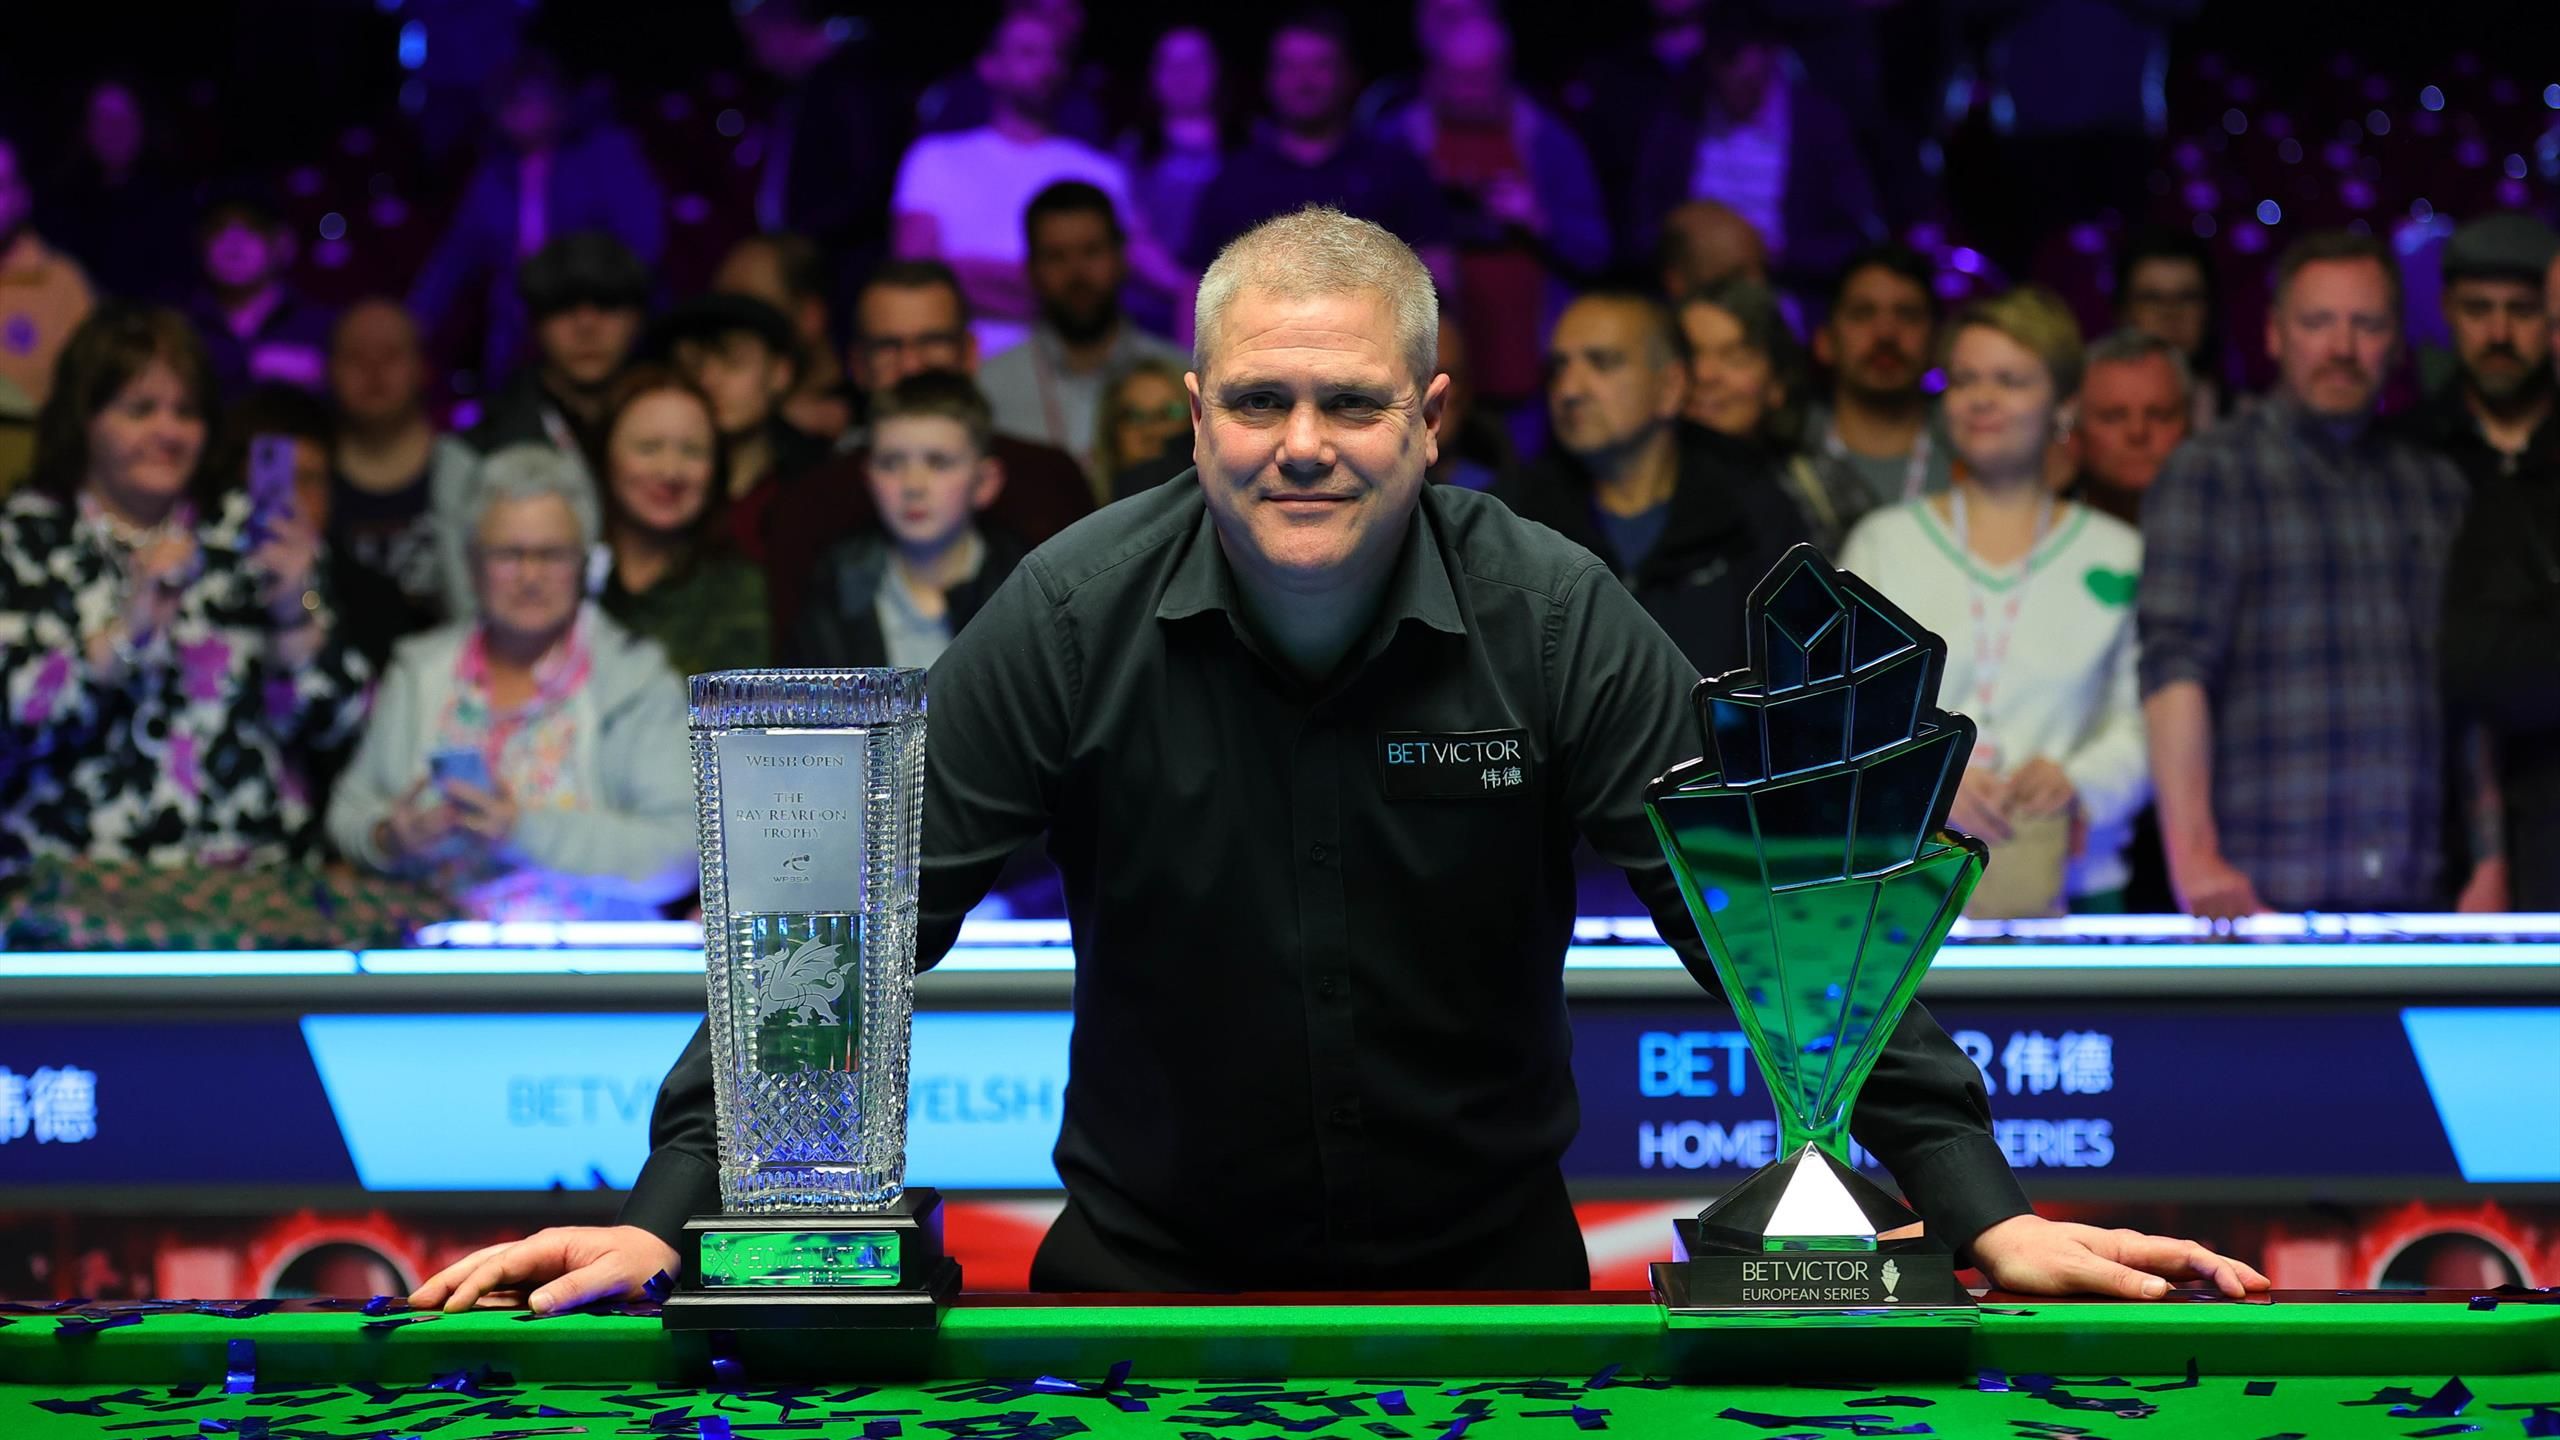 Robert Milkins edges out Shaun Murphy in pulsating Welsh Open final to grab emotional glory